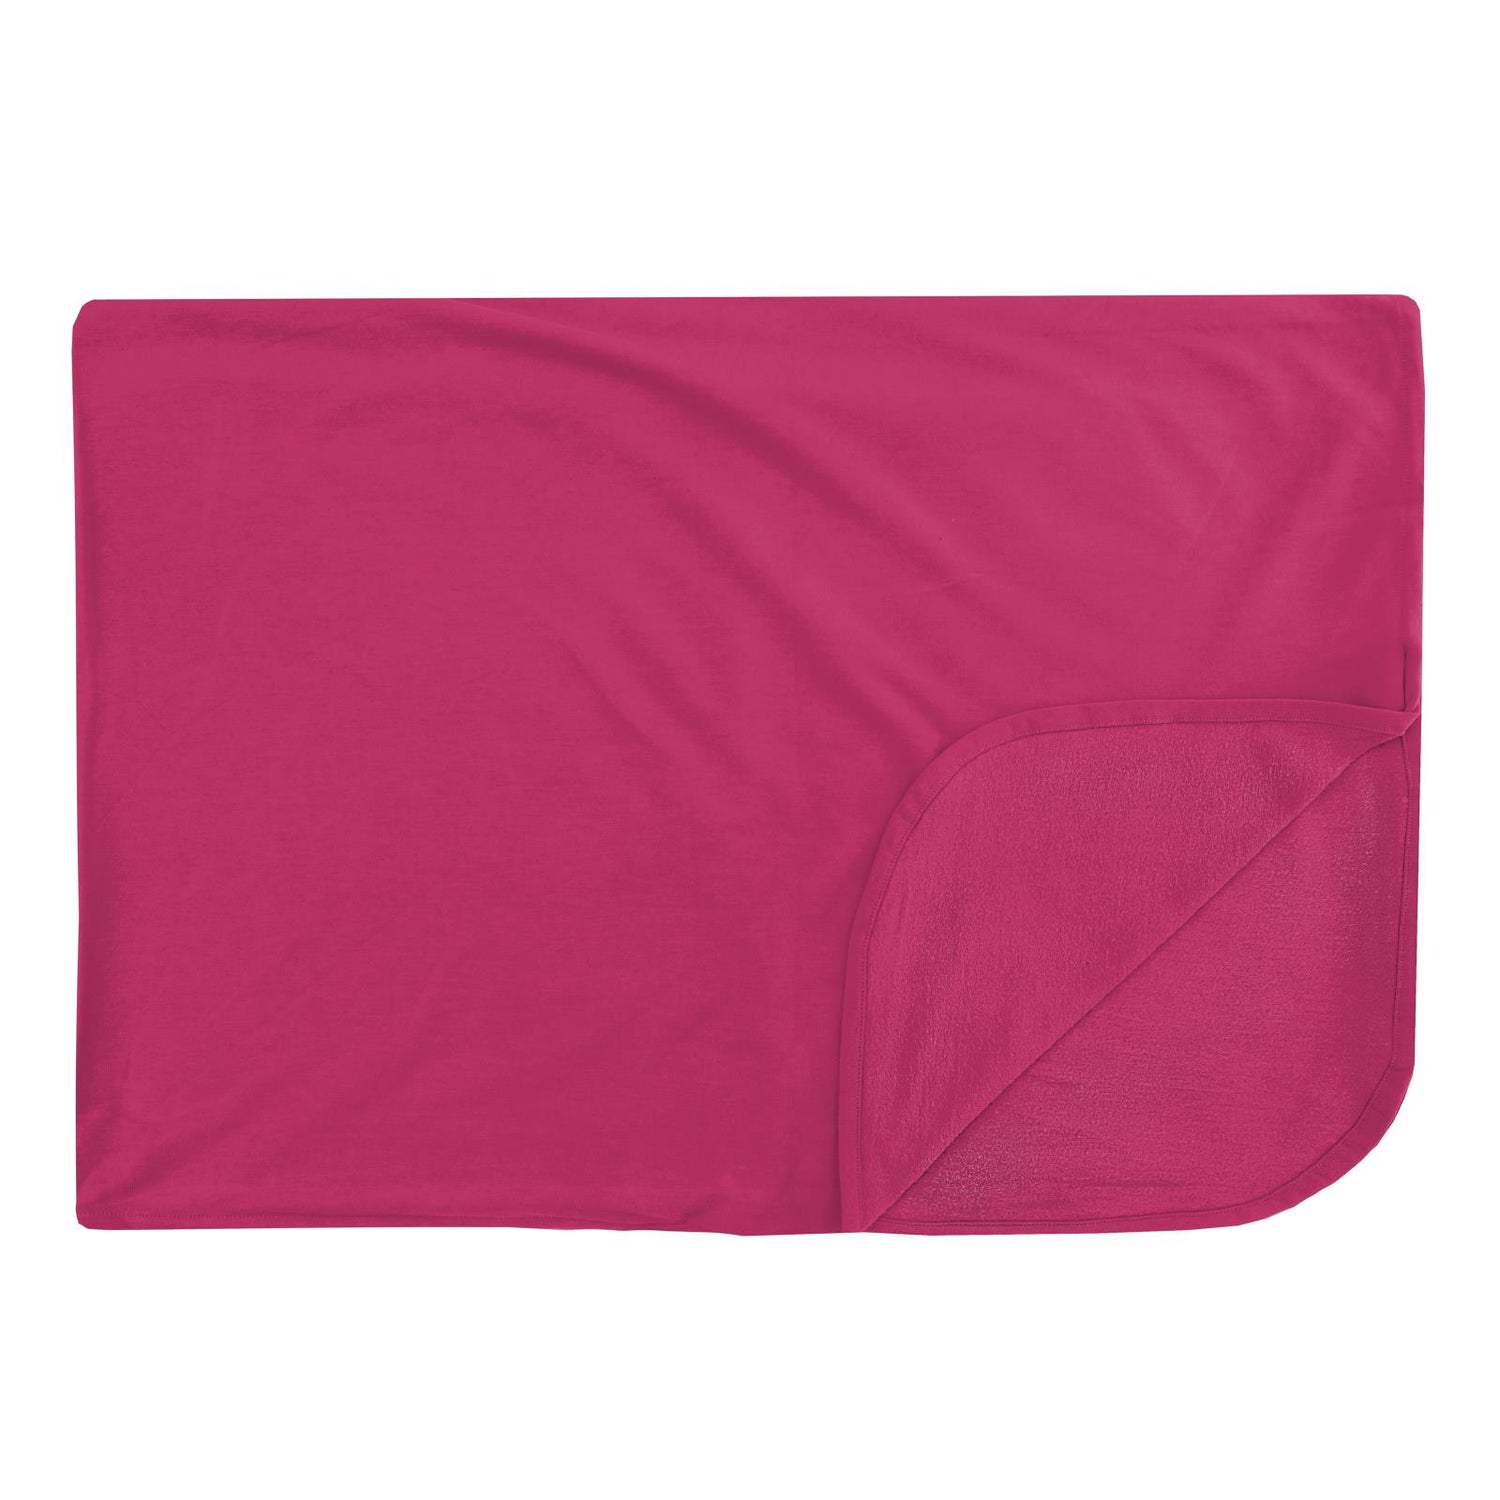 Fleece Throw Blanket in Prickly Pear